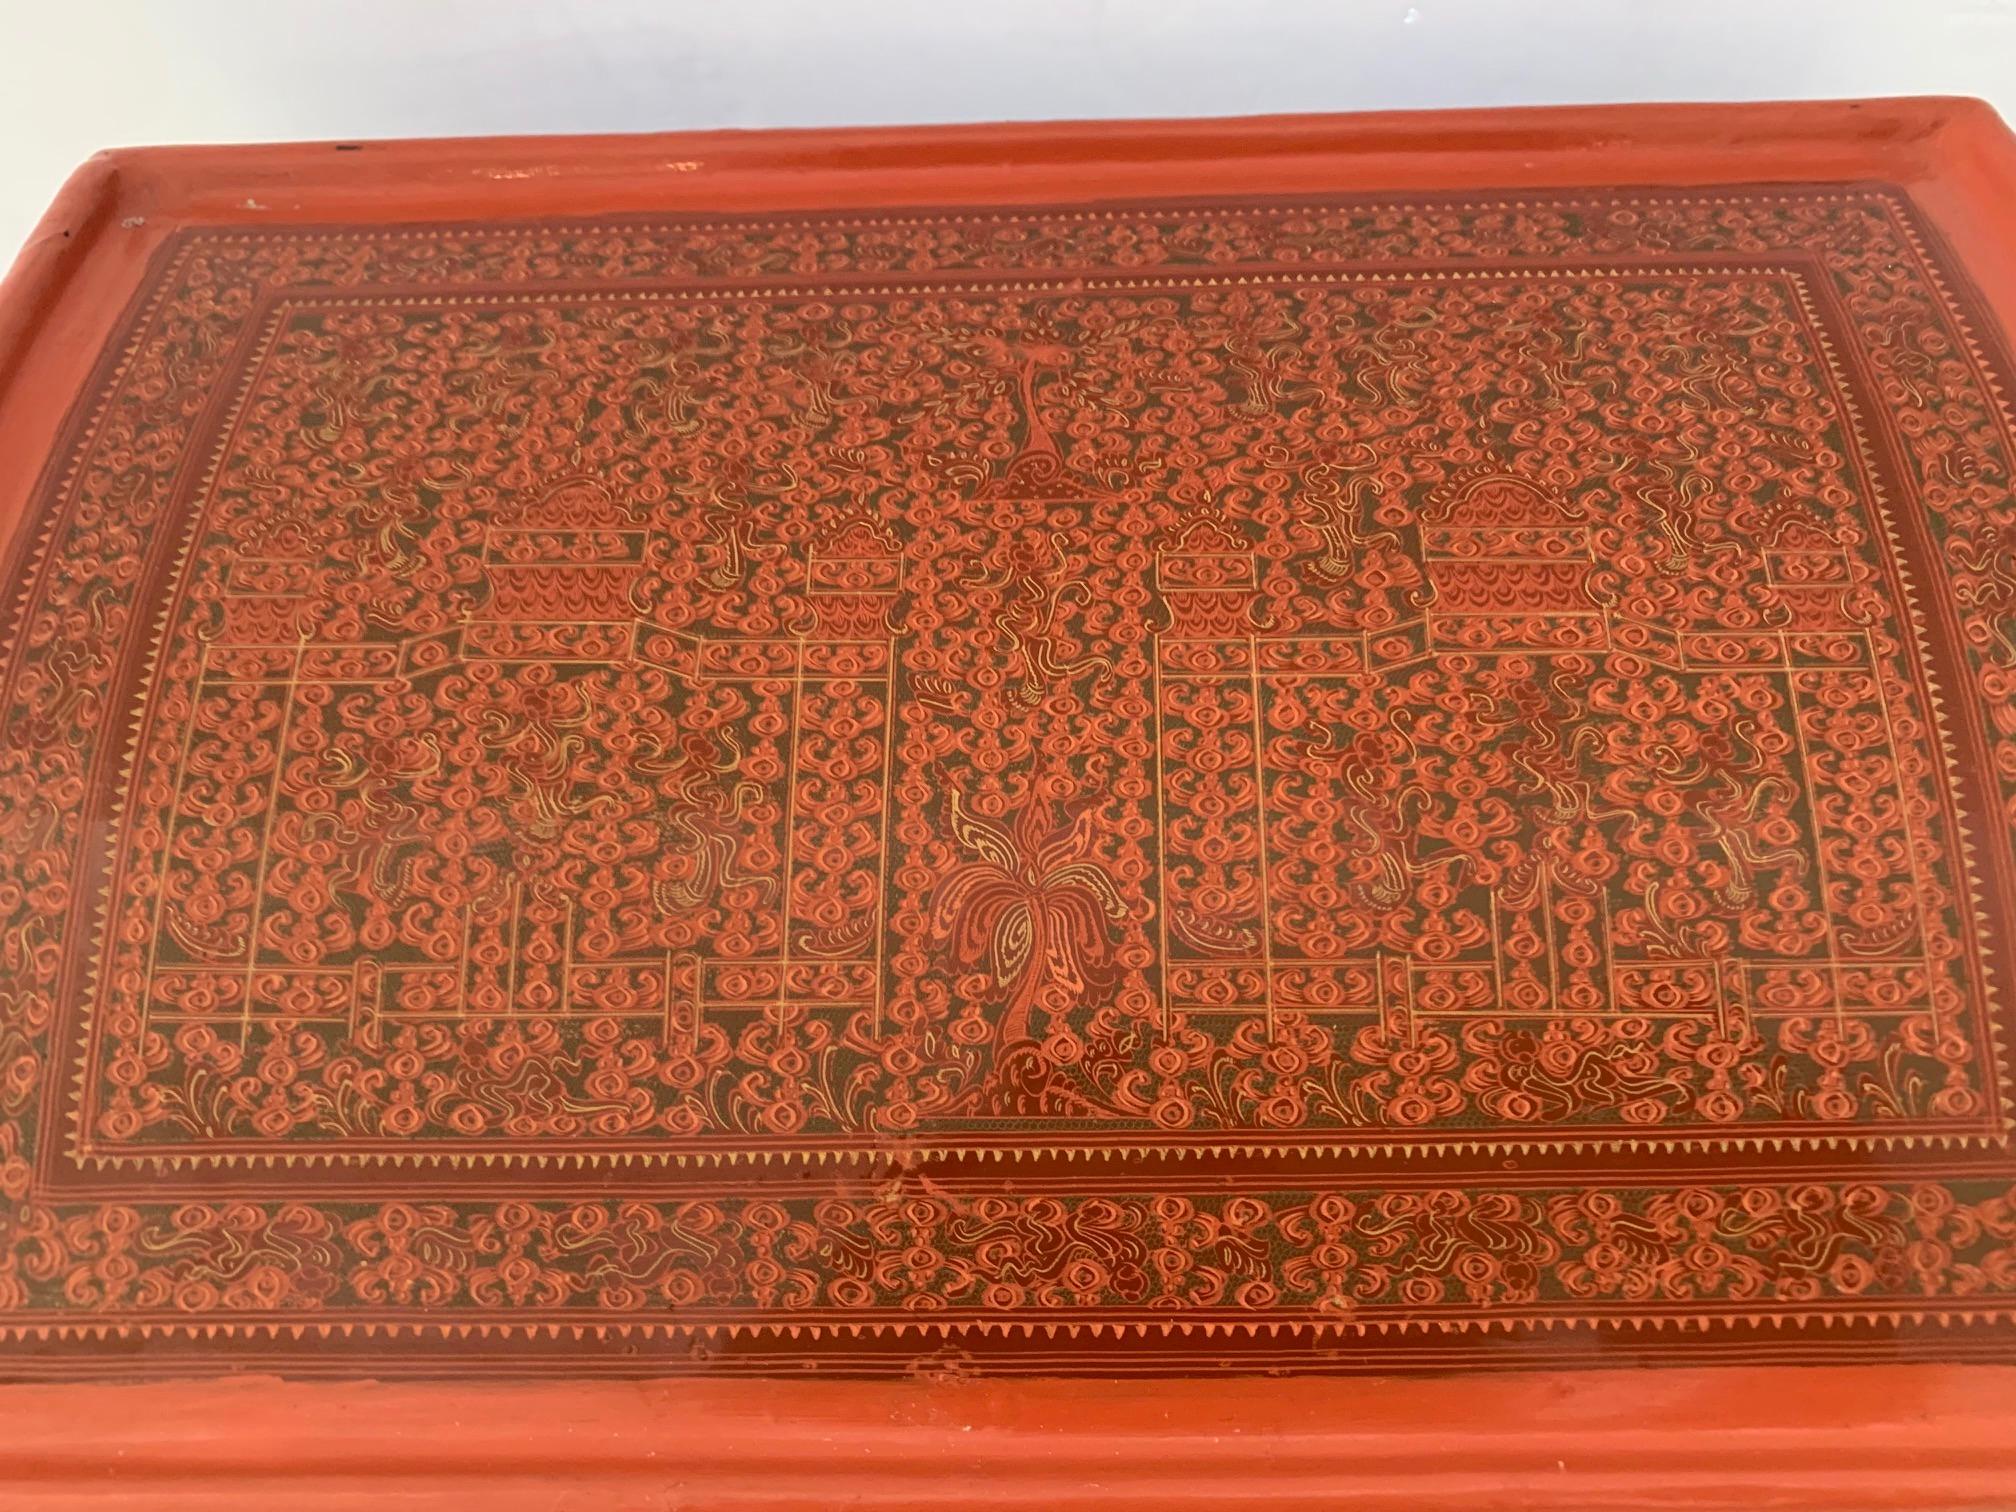 Breathtaking Coral Hand Painted Laquered Asian Dome Box For Sale 6